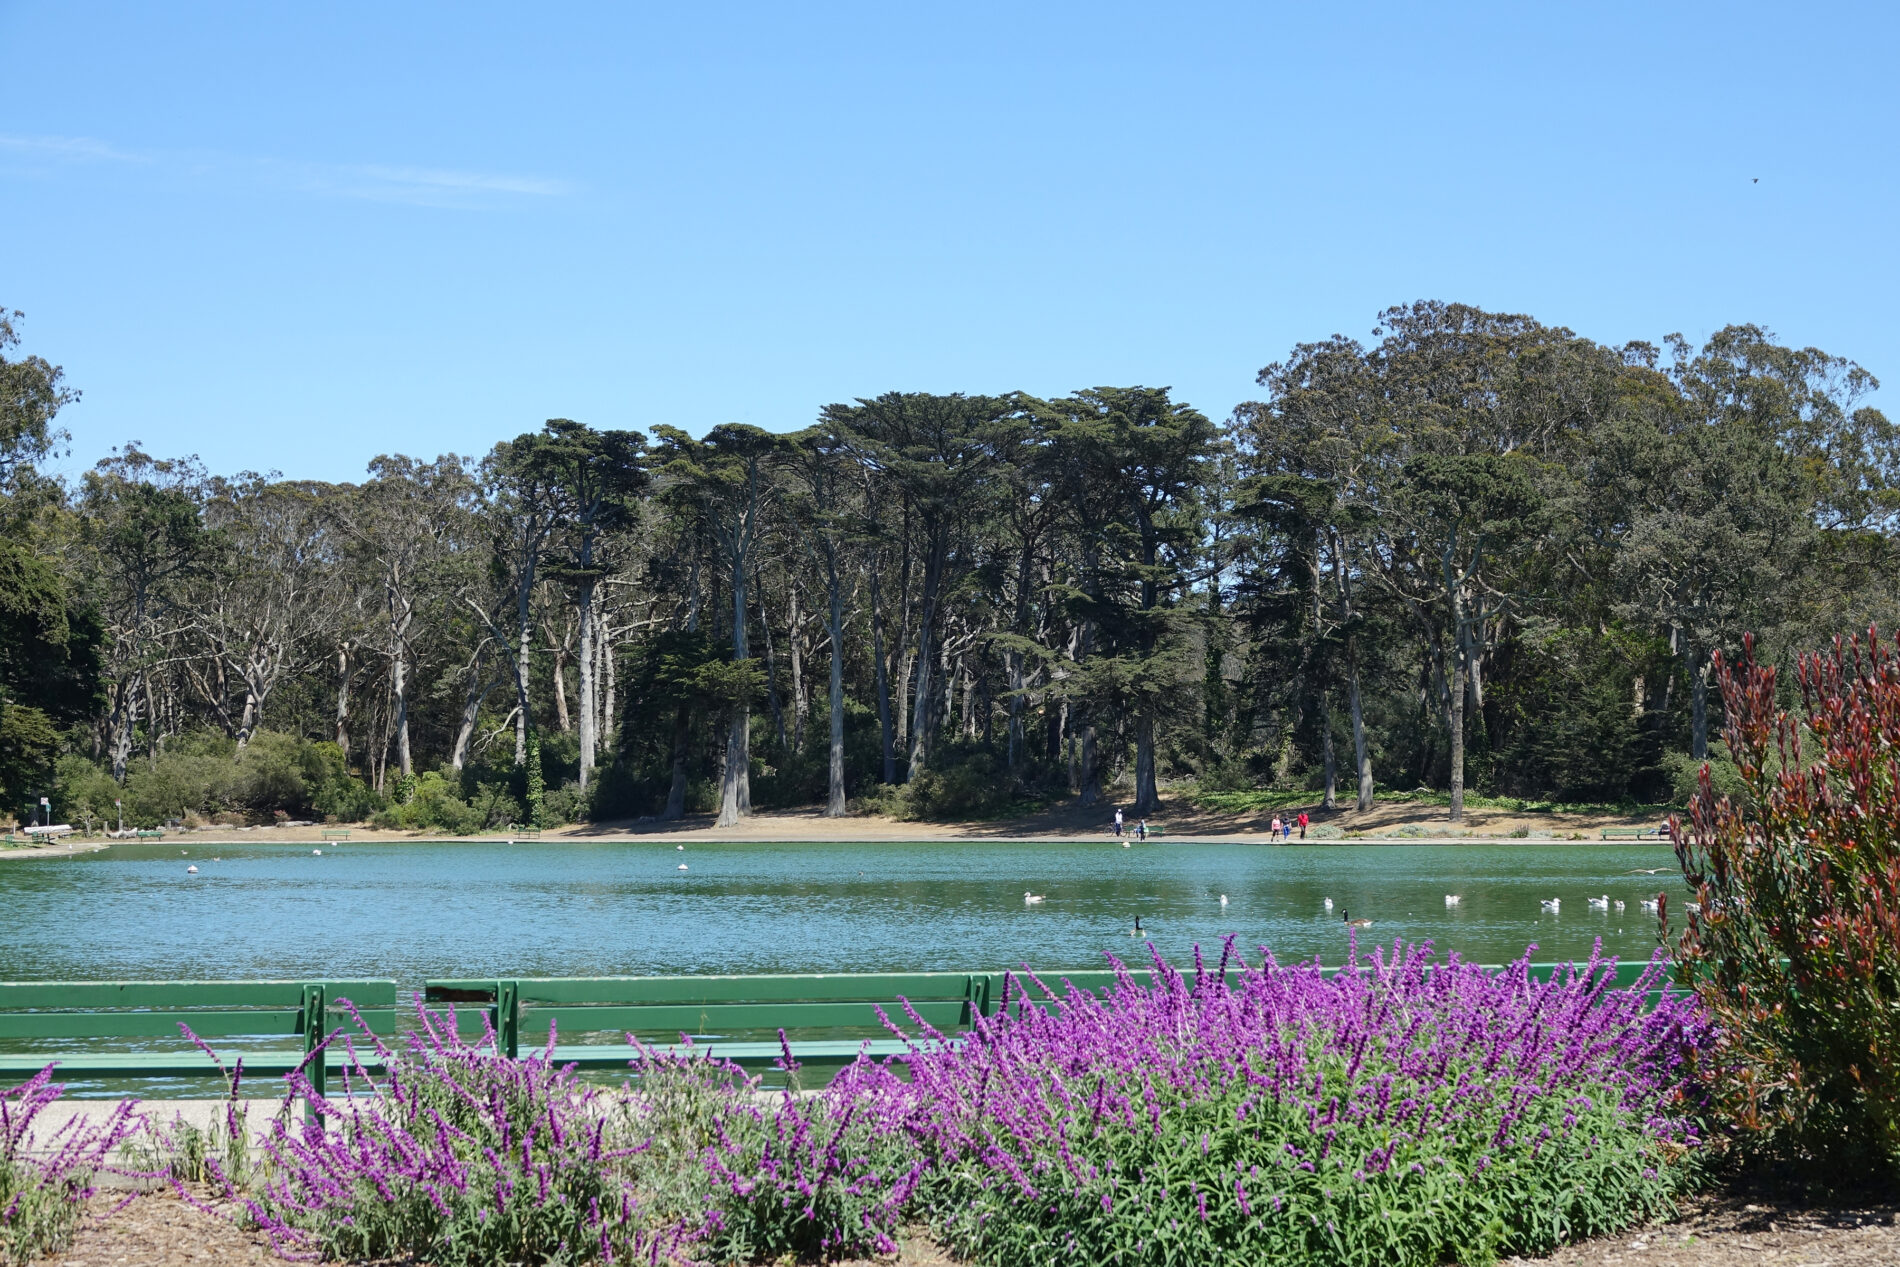 Spreckels lake in Golden Gate Park was built for model boating hobbyists and is also home to turtles and birds.